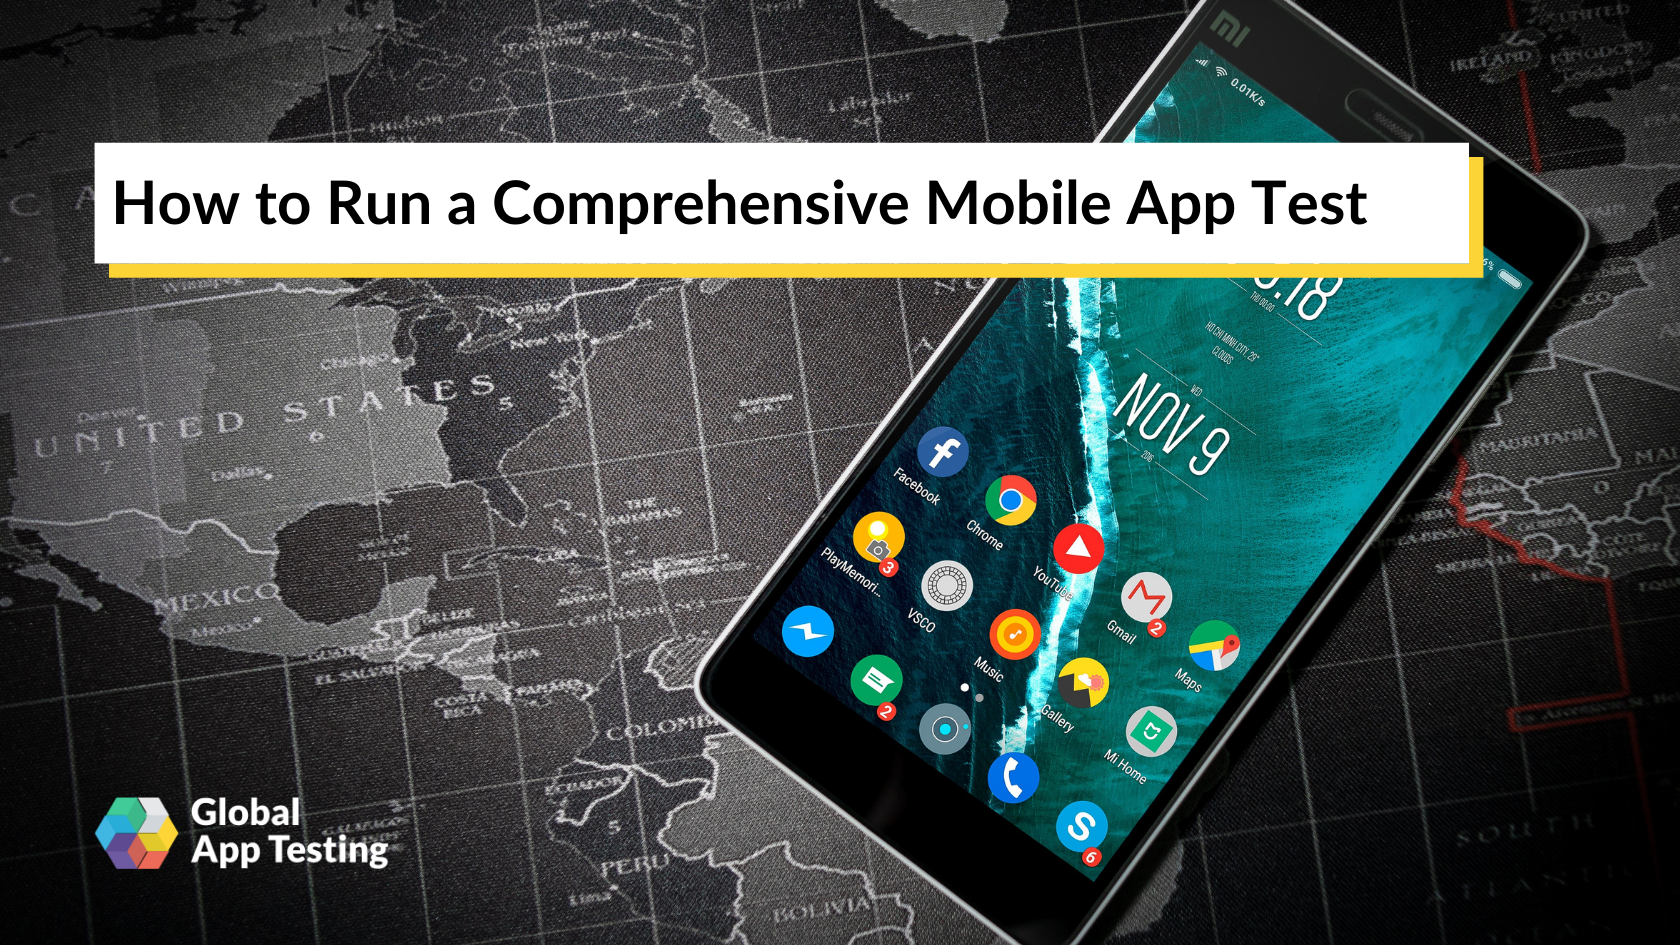 How to Run a Comprehensive Mobile App Test